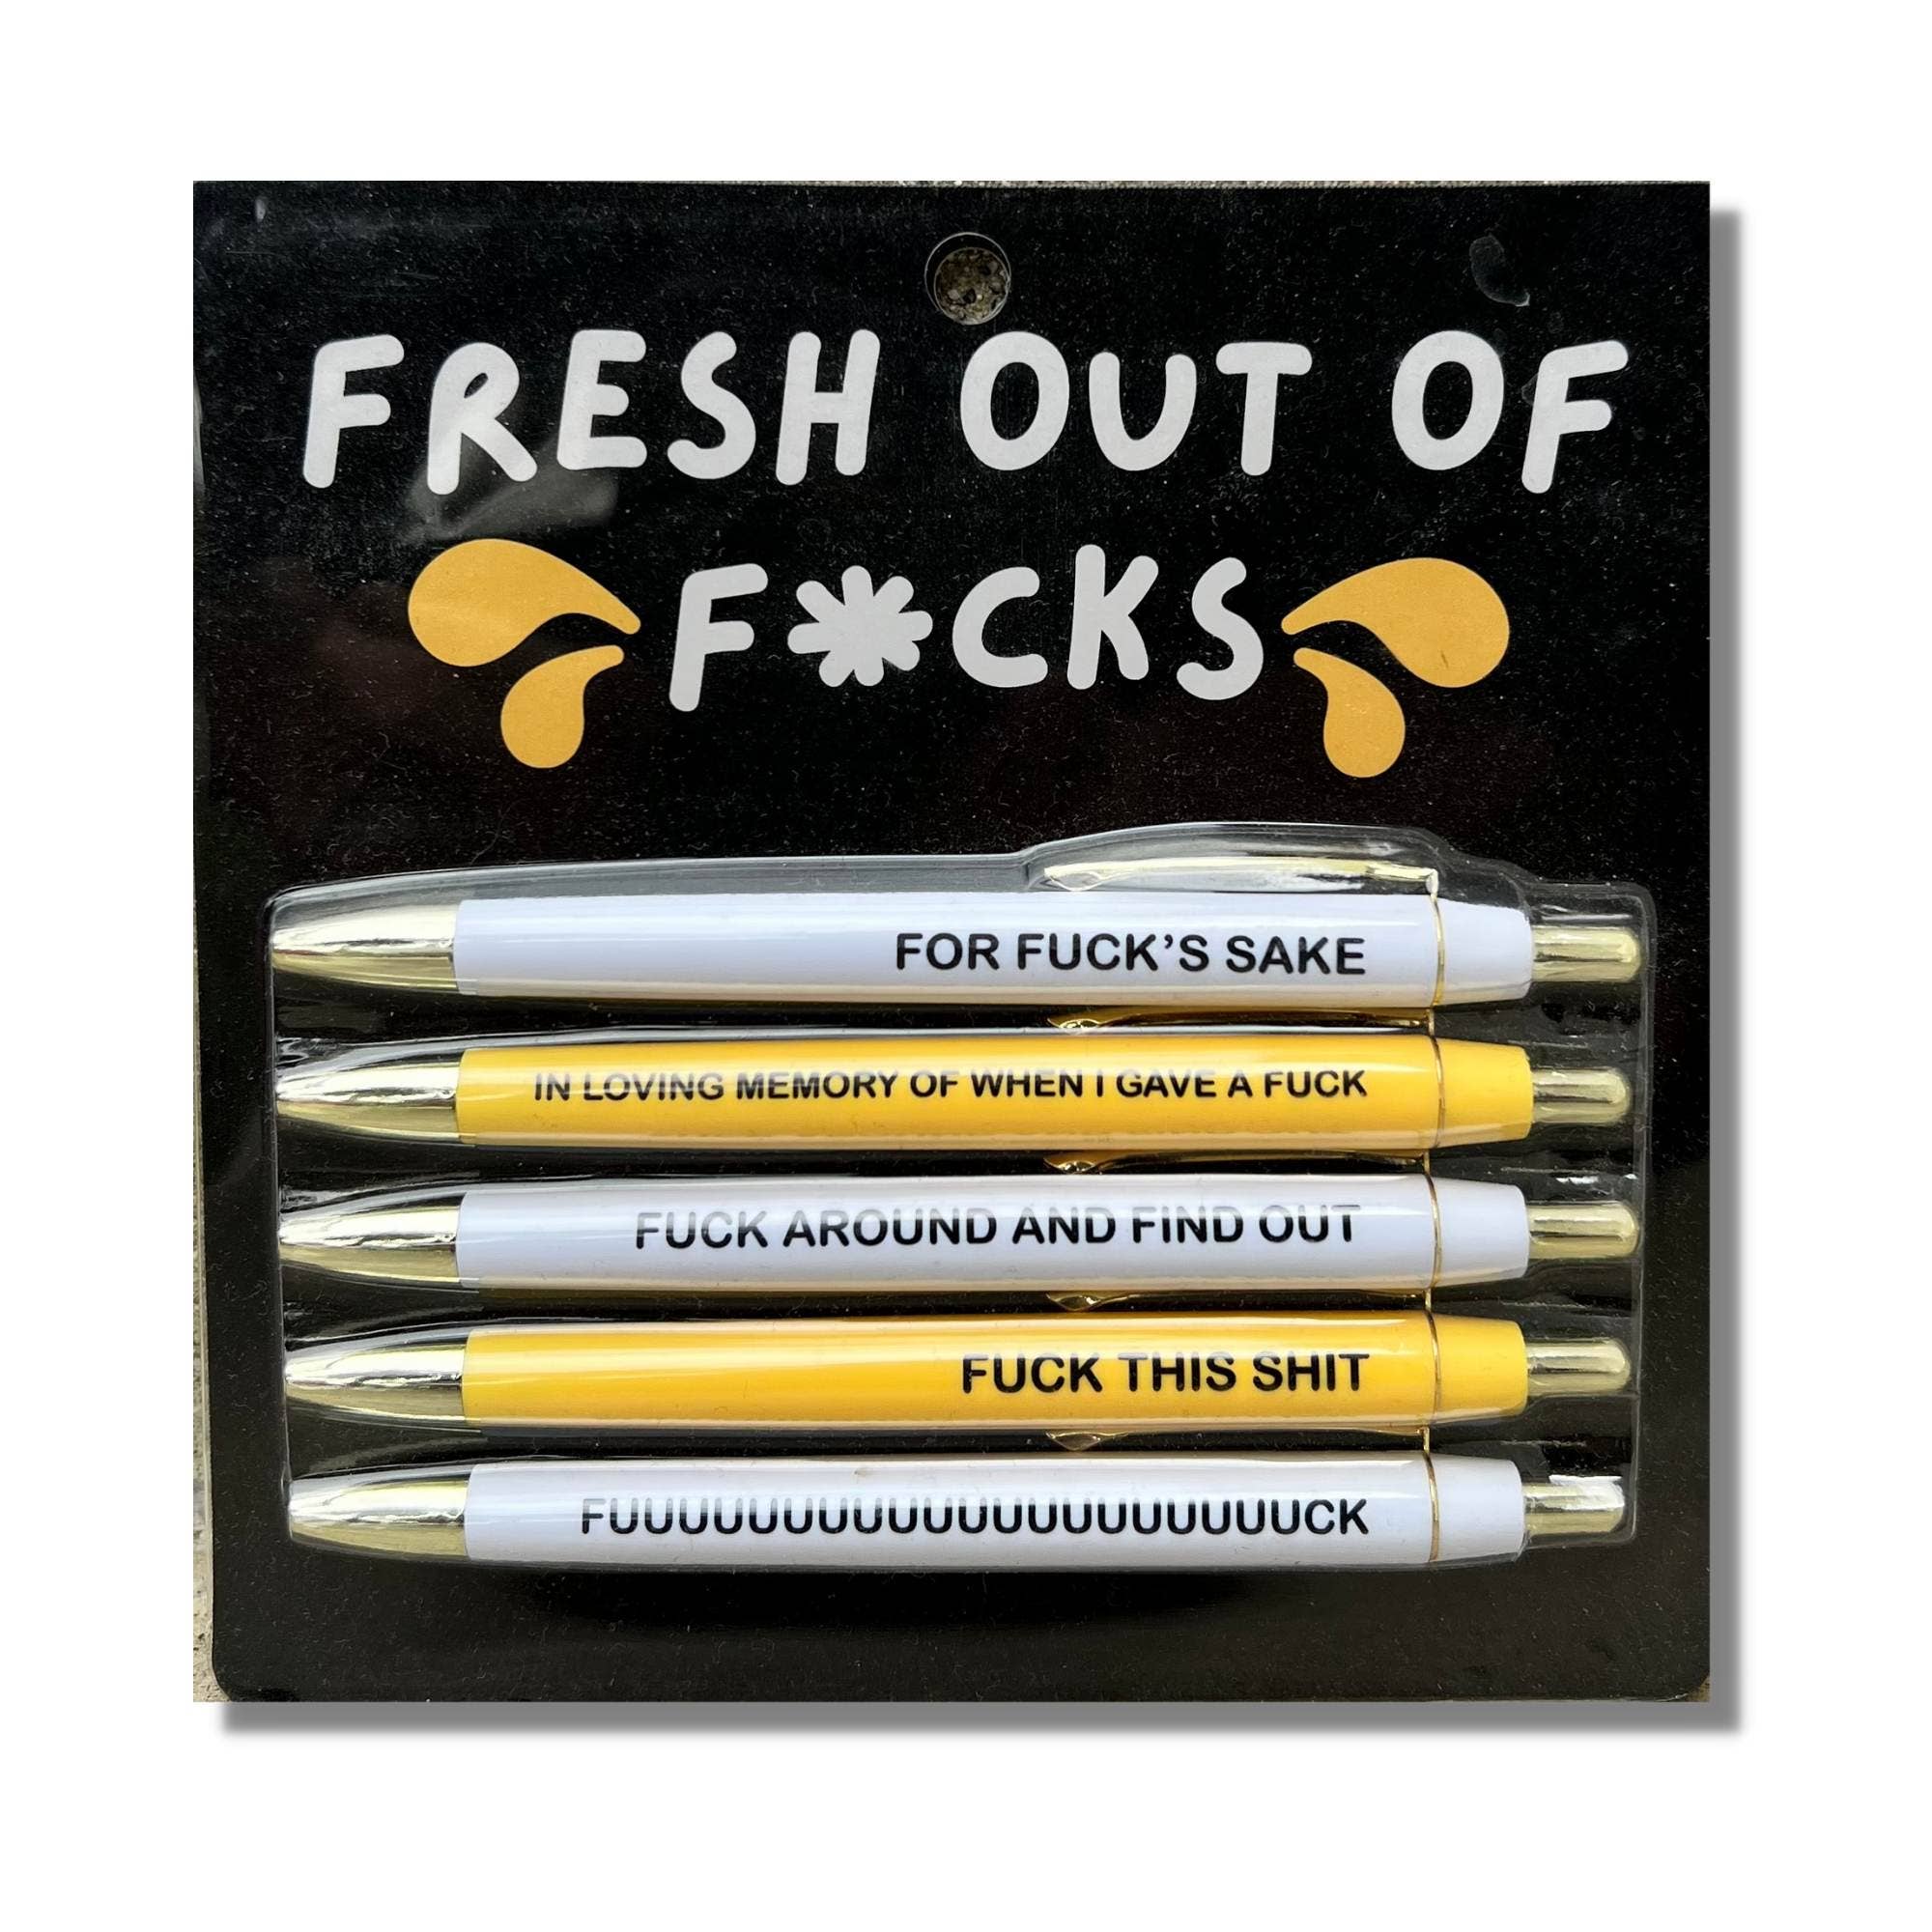  Fresh Outta Fucks Pad and Pen - Snarky Novelty Office  Supplies, Funny Gifts for Friends! Includes Funny Pens, Custom Pen Set, and  Funny Sticky Notes. (2pcs) : Office Products